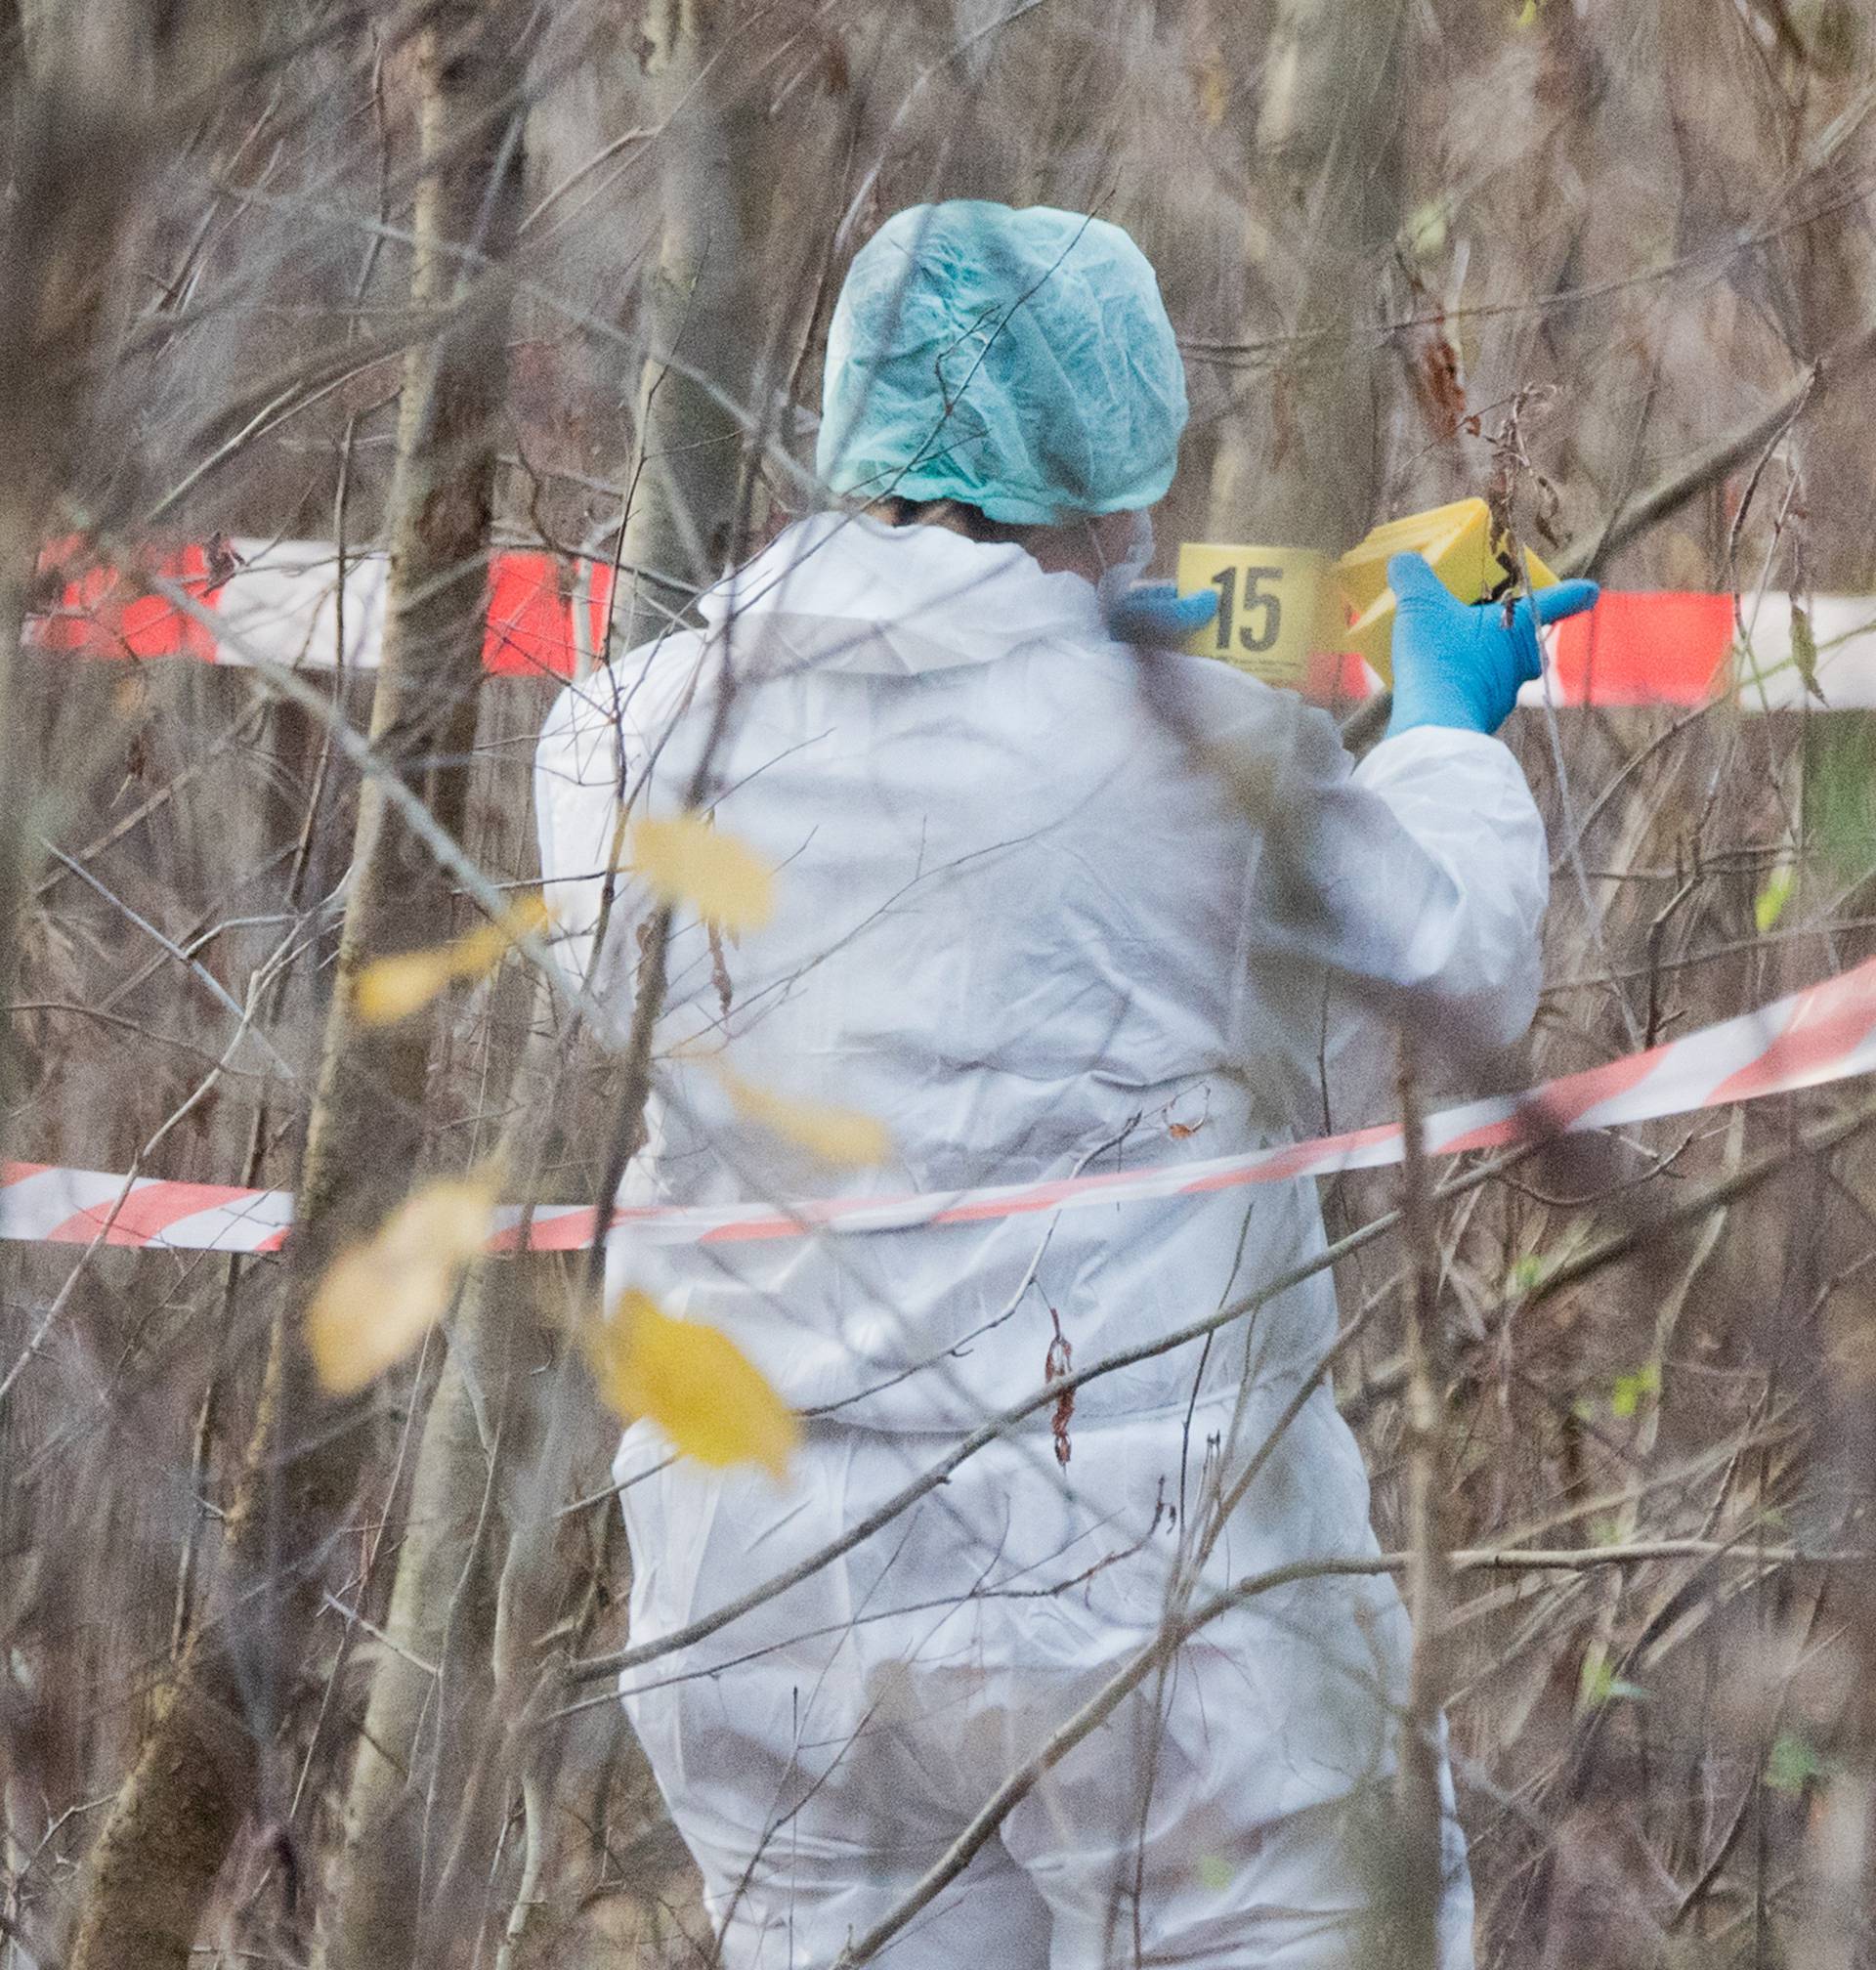 Bound woman discovered near Celle